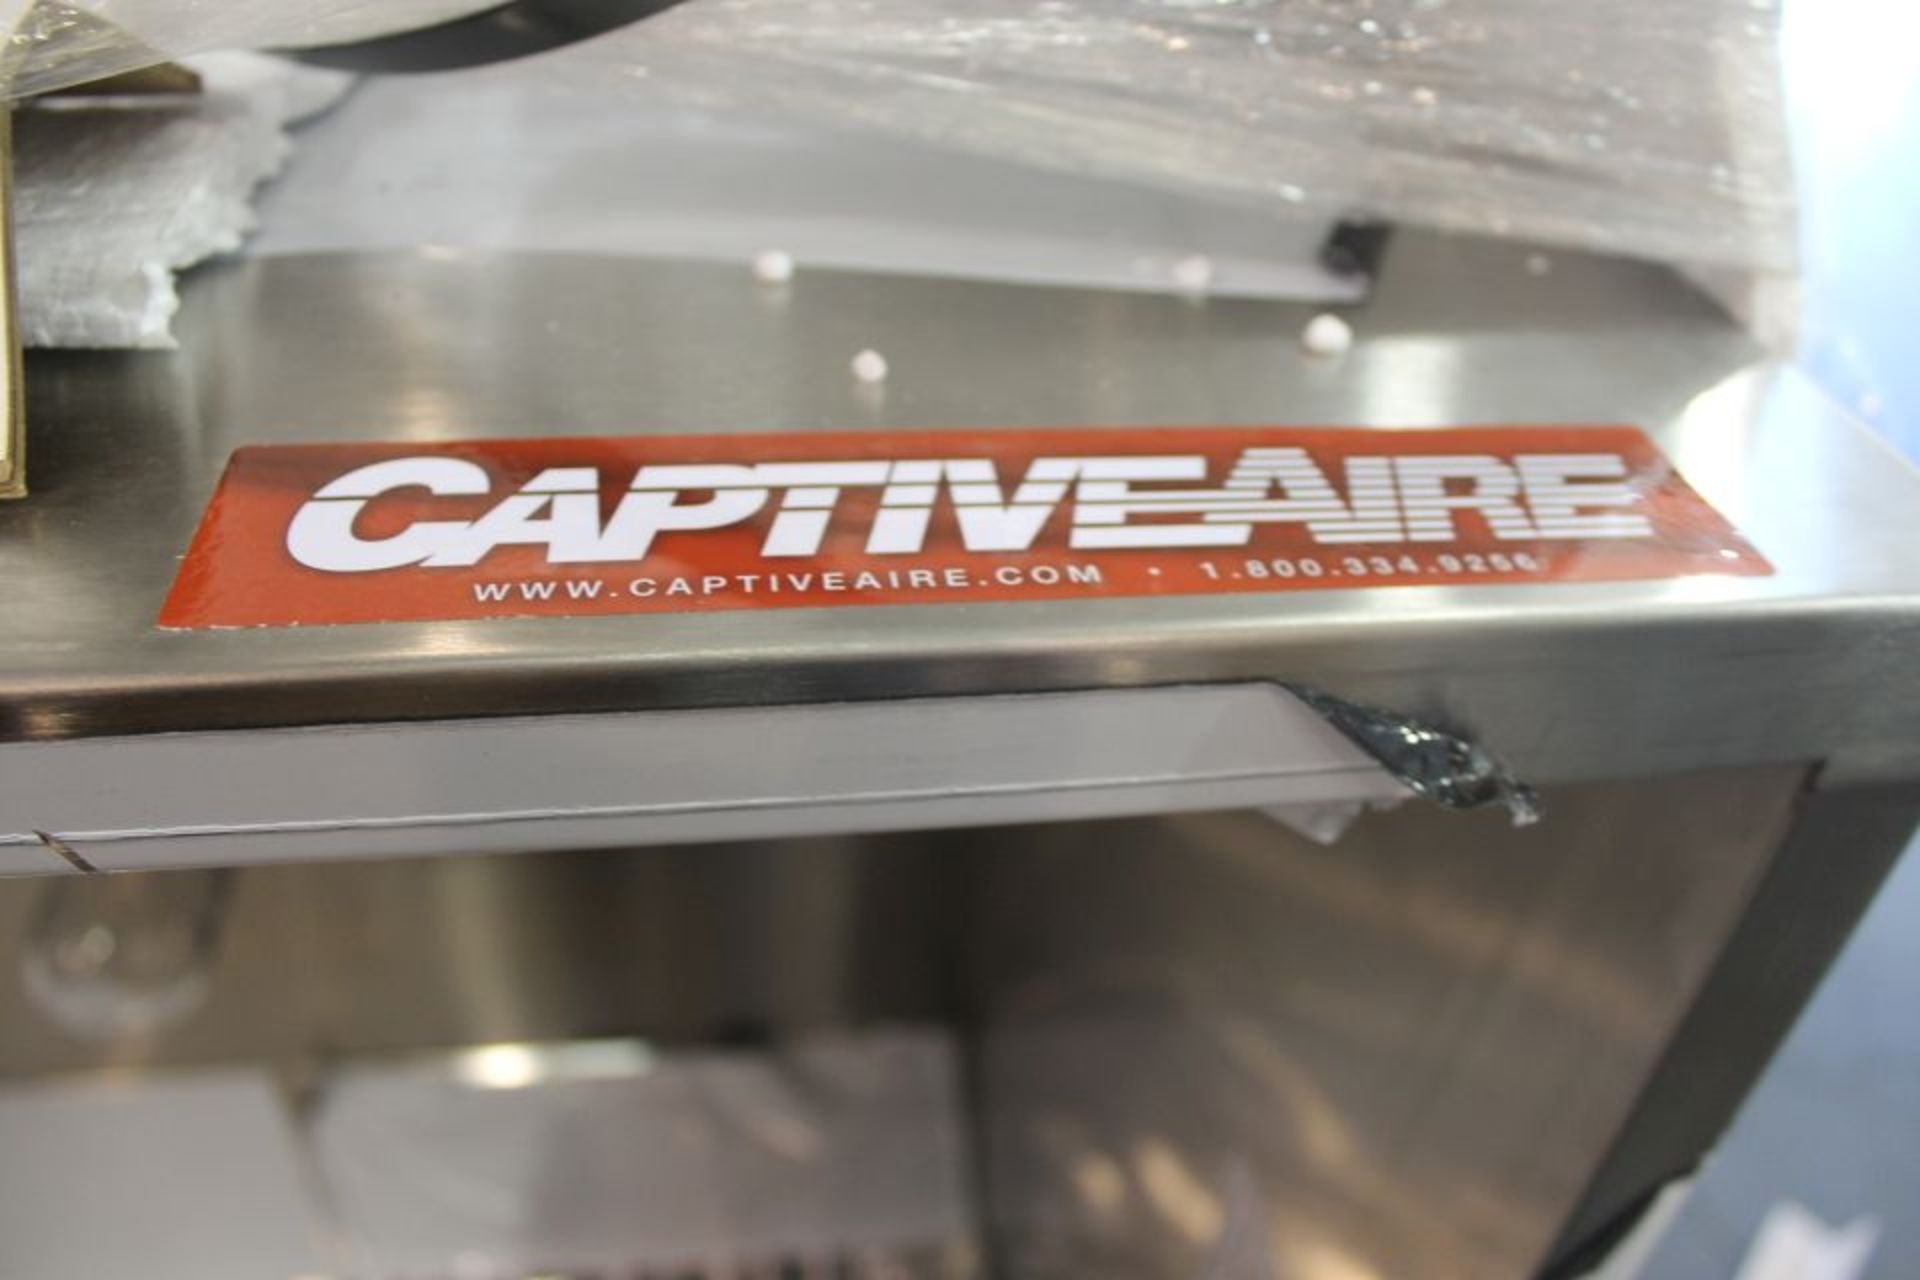 CaptiveAire 117" x 54" new canopy including some rooftop fixtures - Image 7 of 7